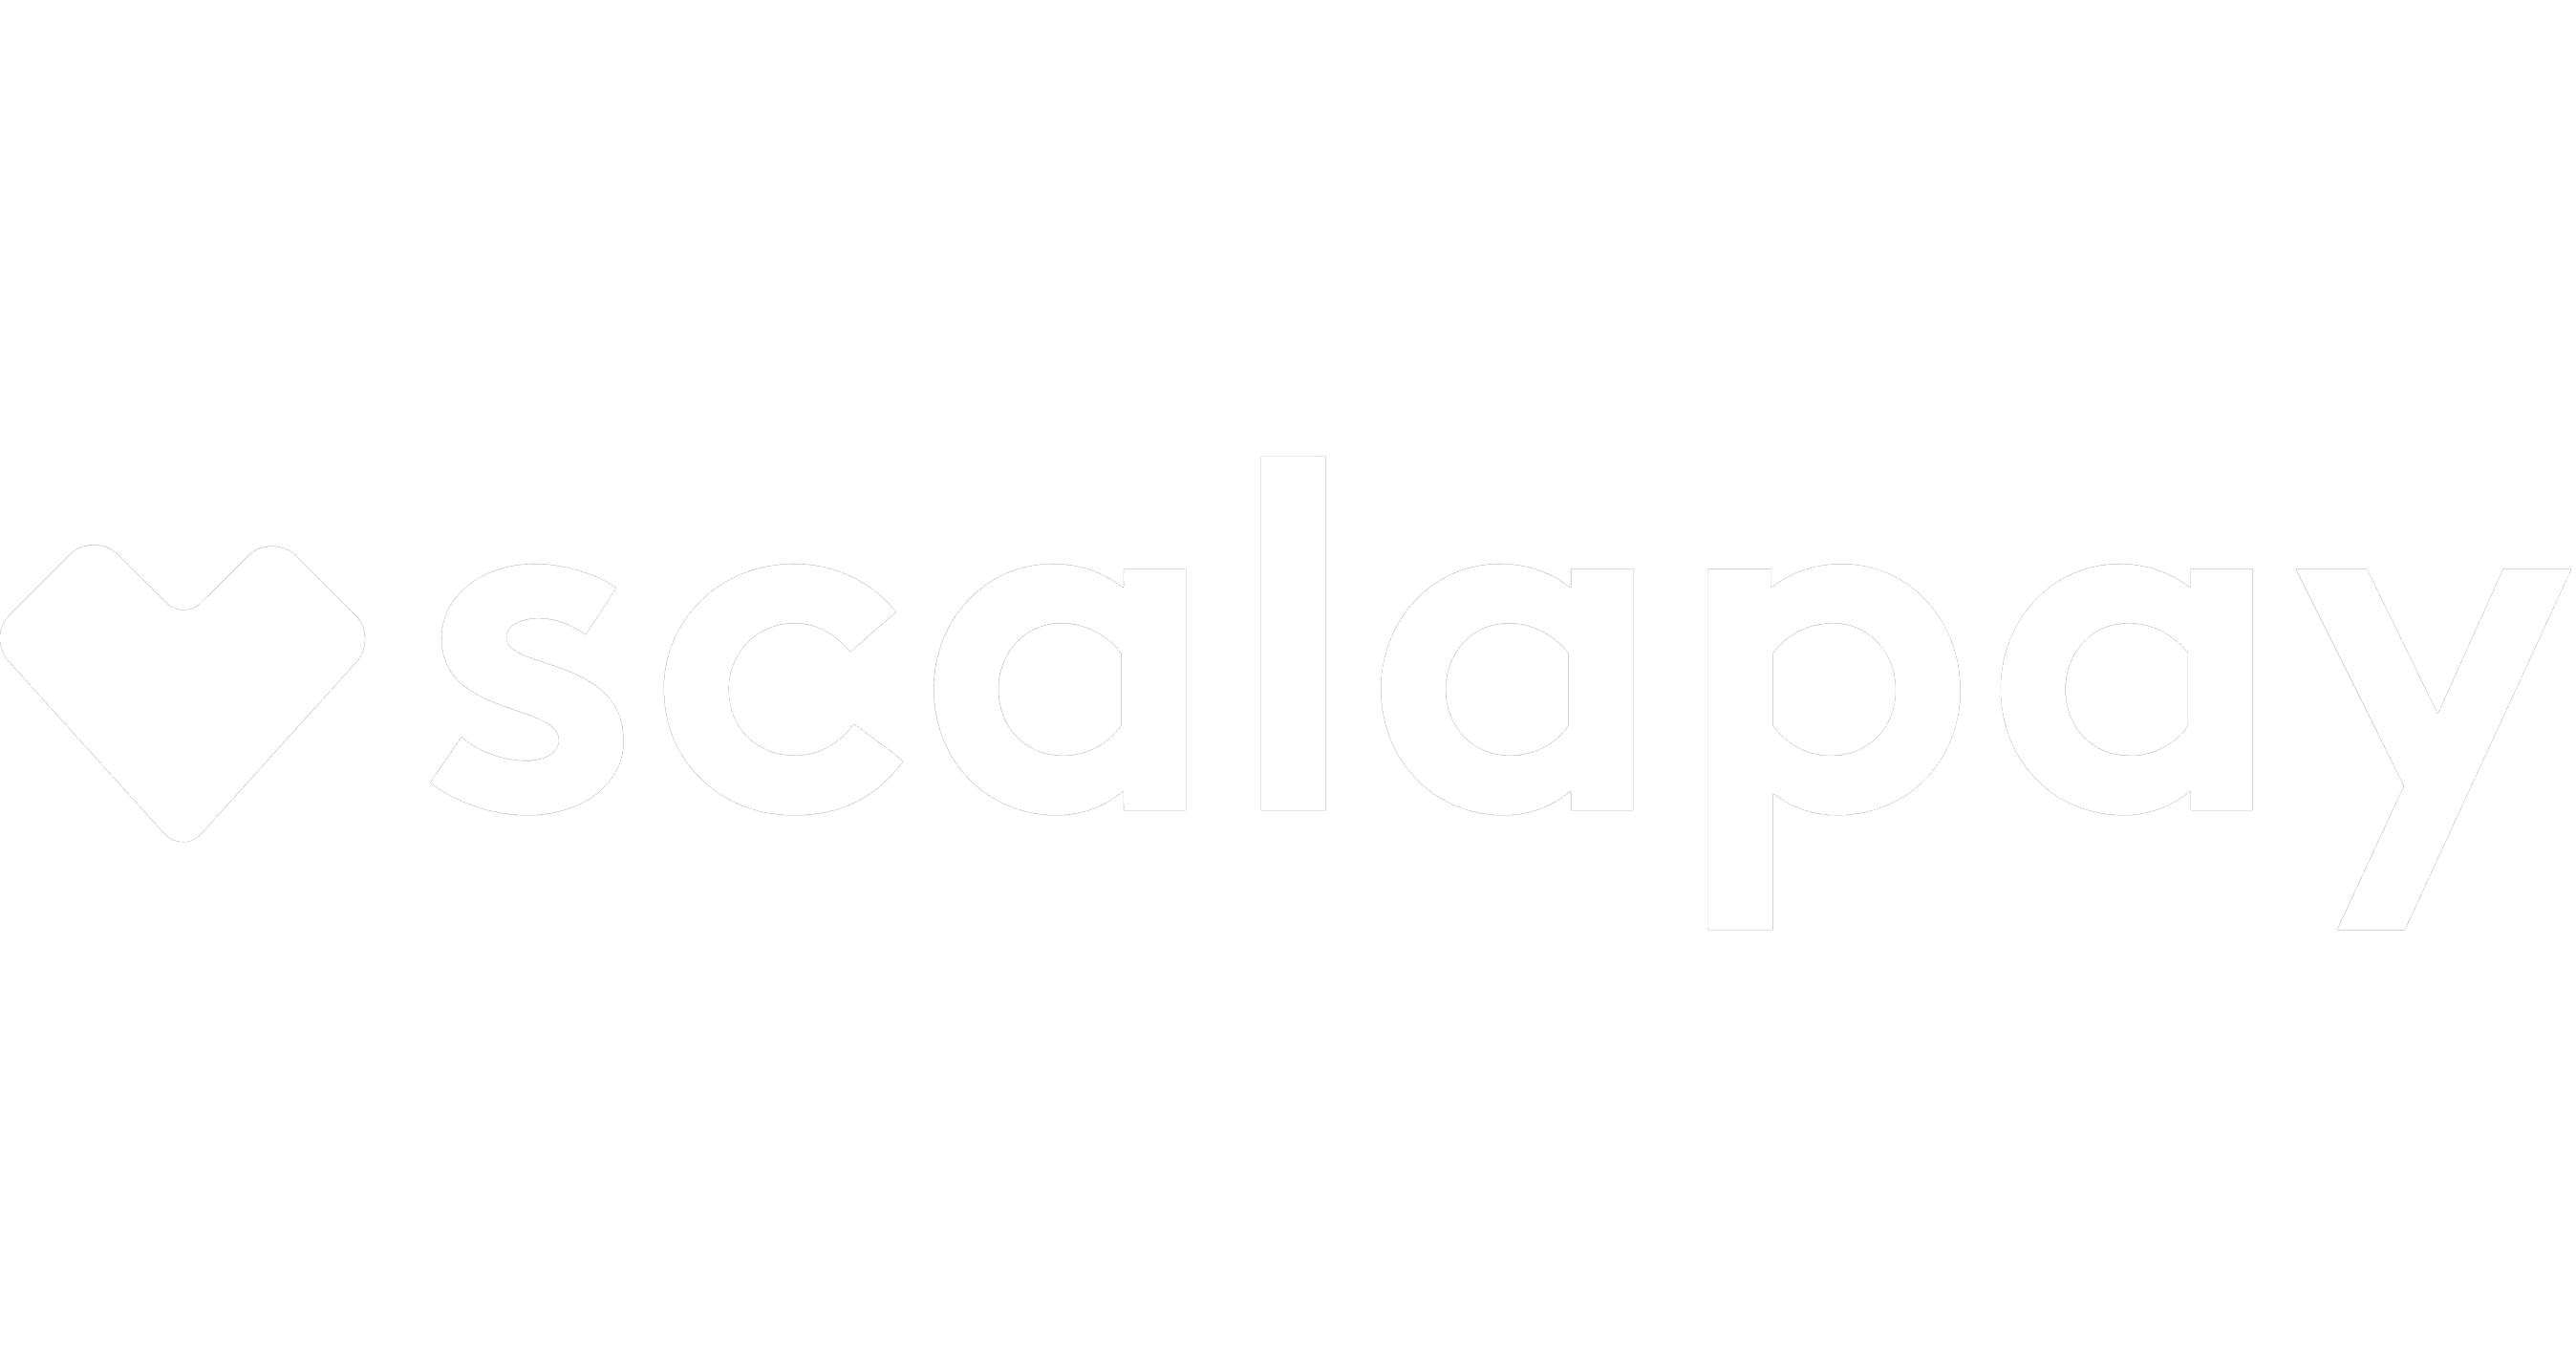 Ciao Bella! Scalapay brings home $497 million as Italy now lays claim to its first unicorn